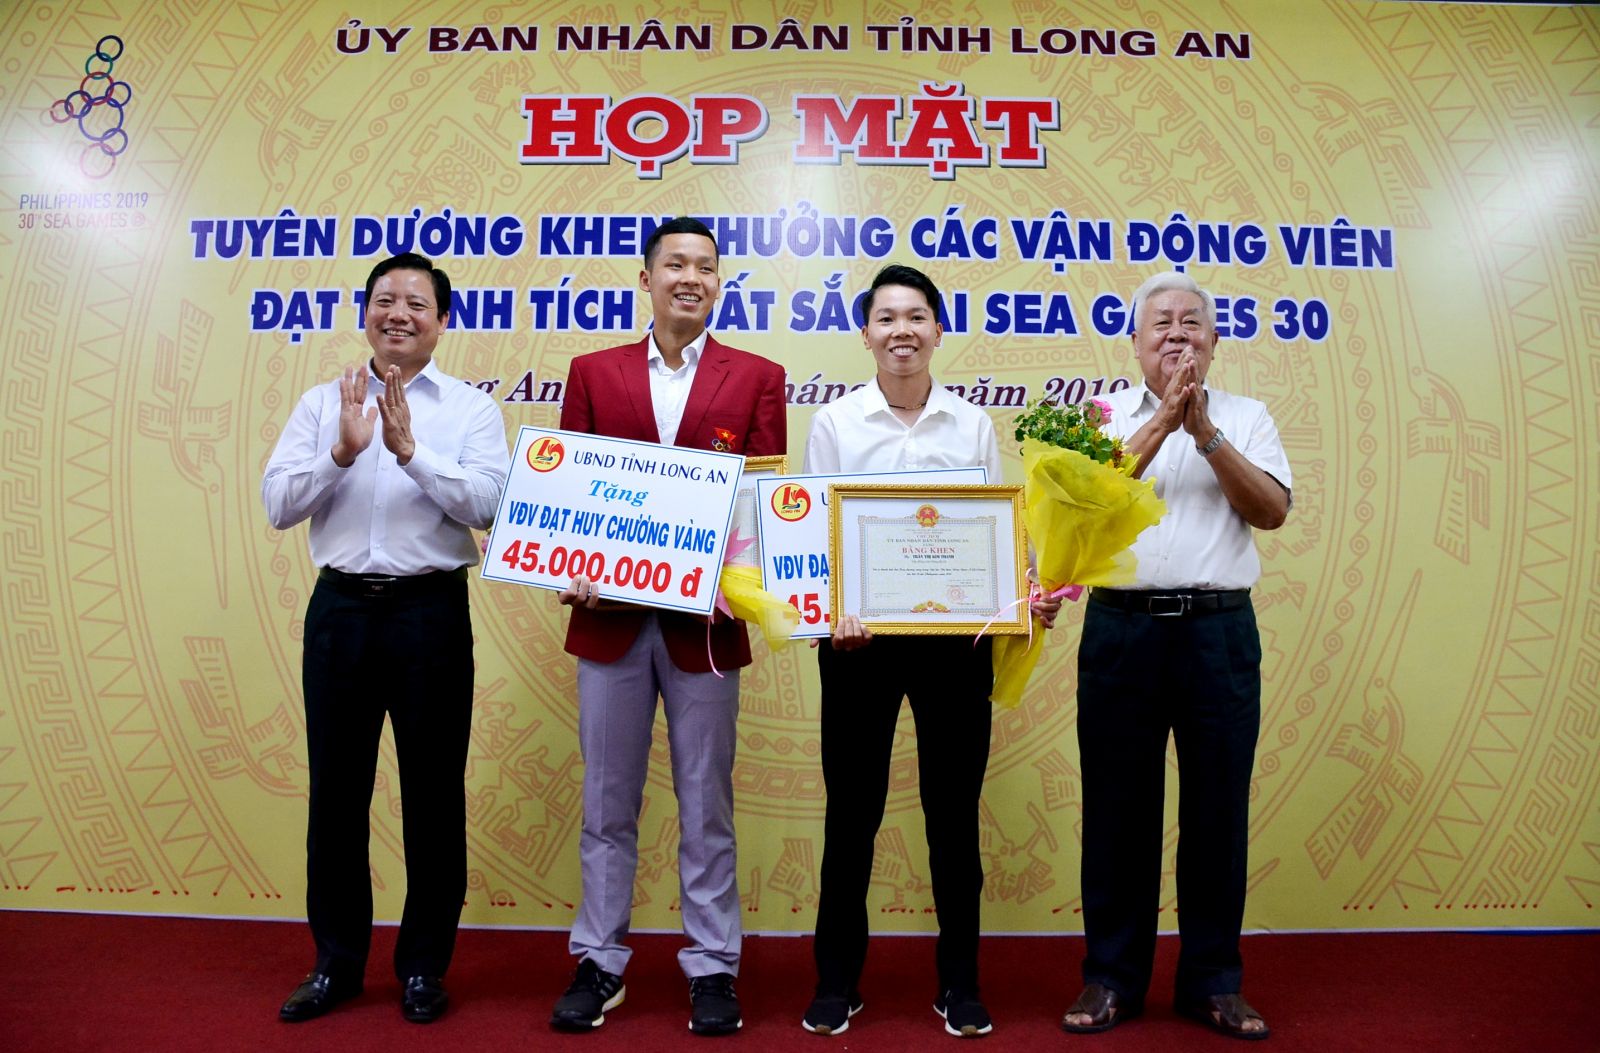 Former Secretary of the Provincial Party Committee - Le Thanh Tam (R) and Vice Chairman of the Provincial People's Committee - Pham Tan Hoa presented certificates of merit and bonuses to 2 Long An athletes winning gold medals at SEA Games 30